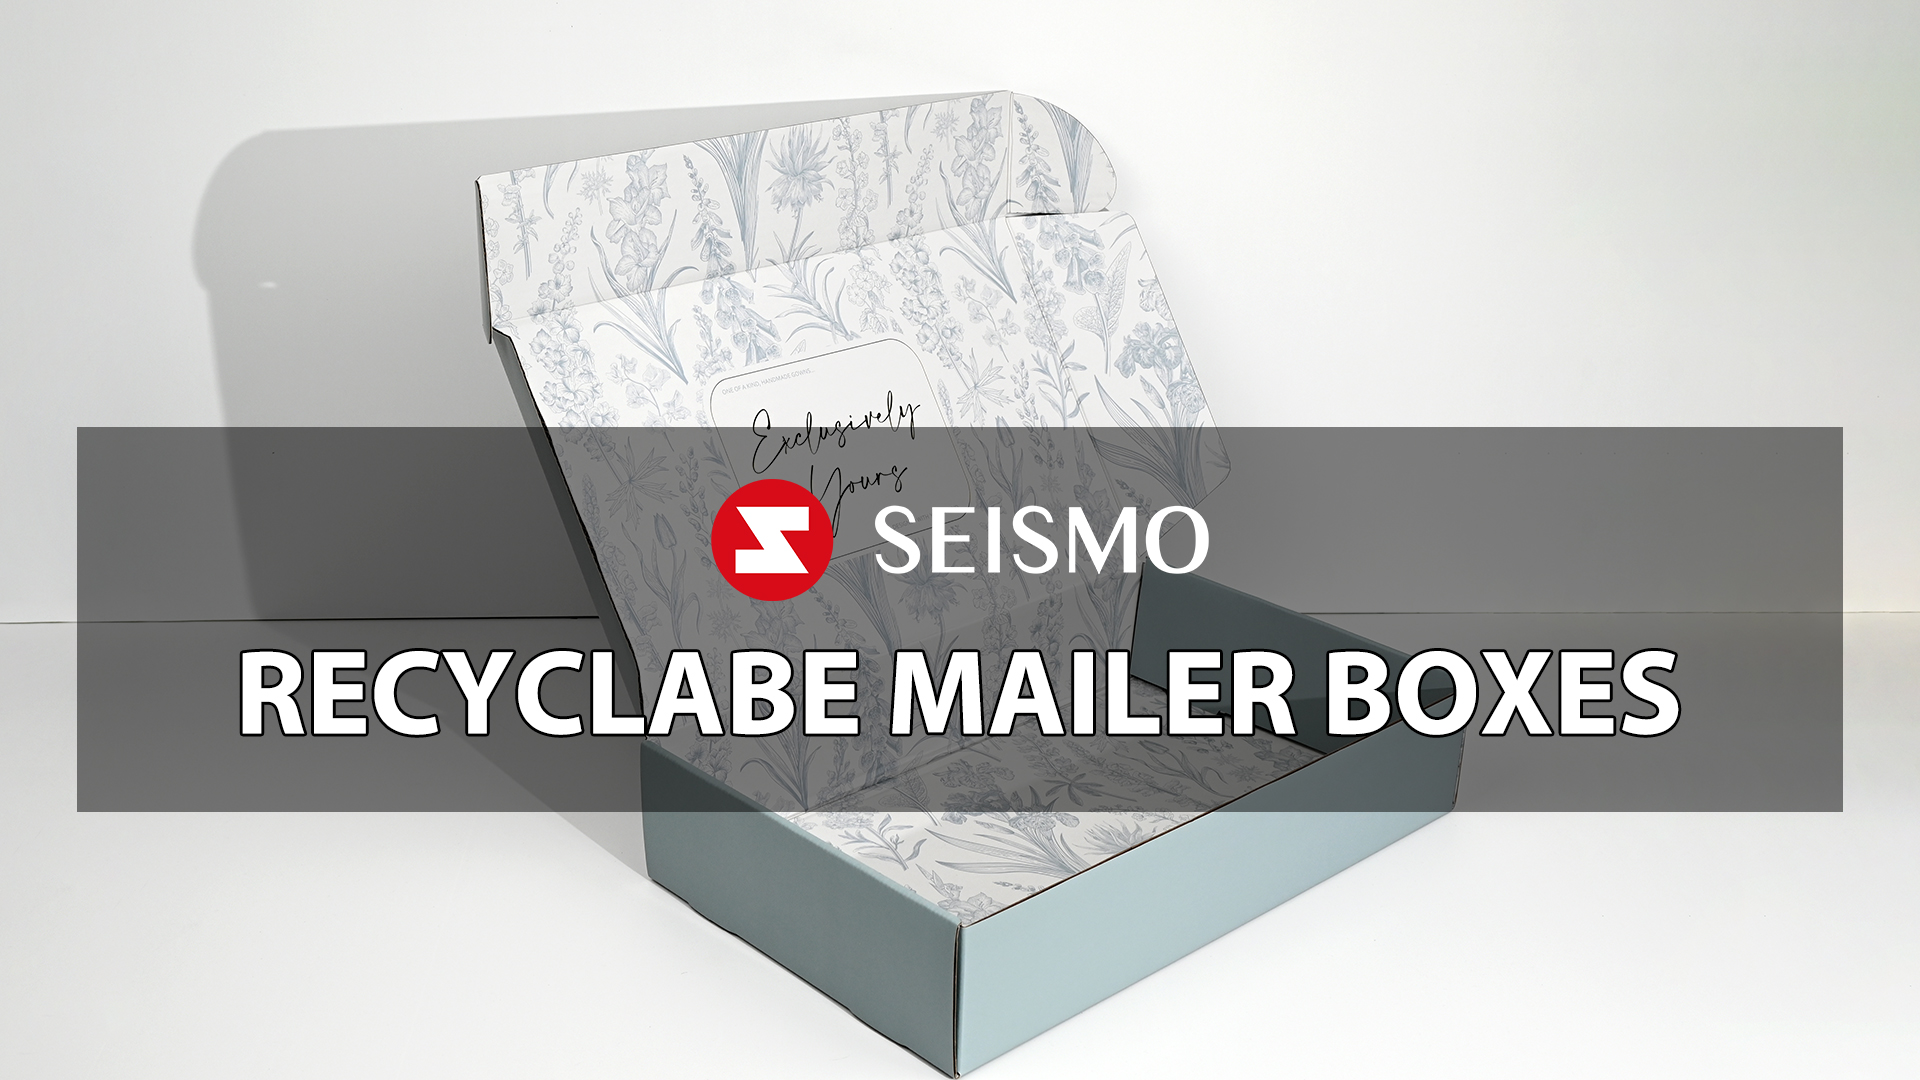 Recyclable Mailer Boxes: An Eco-Conscious Shipping Solution